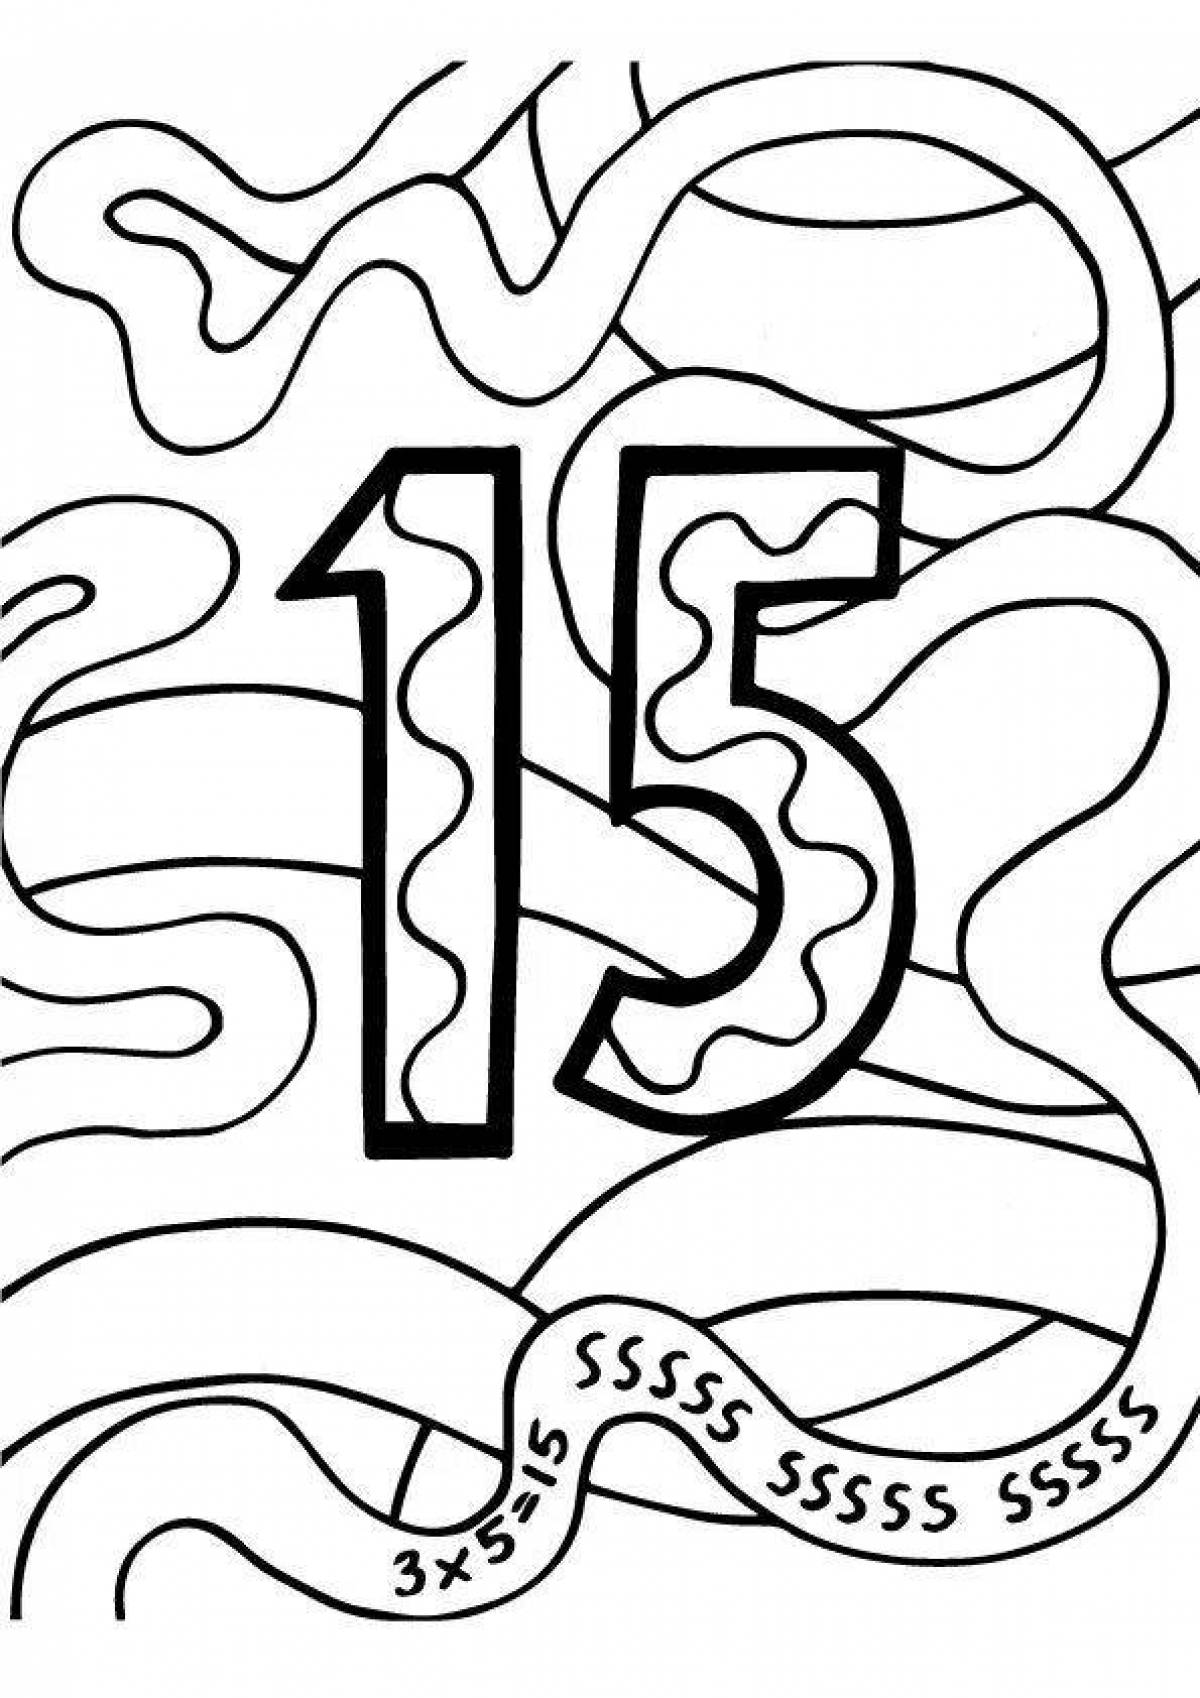 Shine coloring page 15